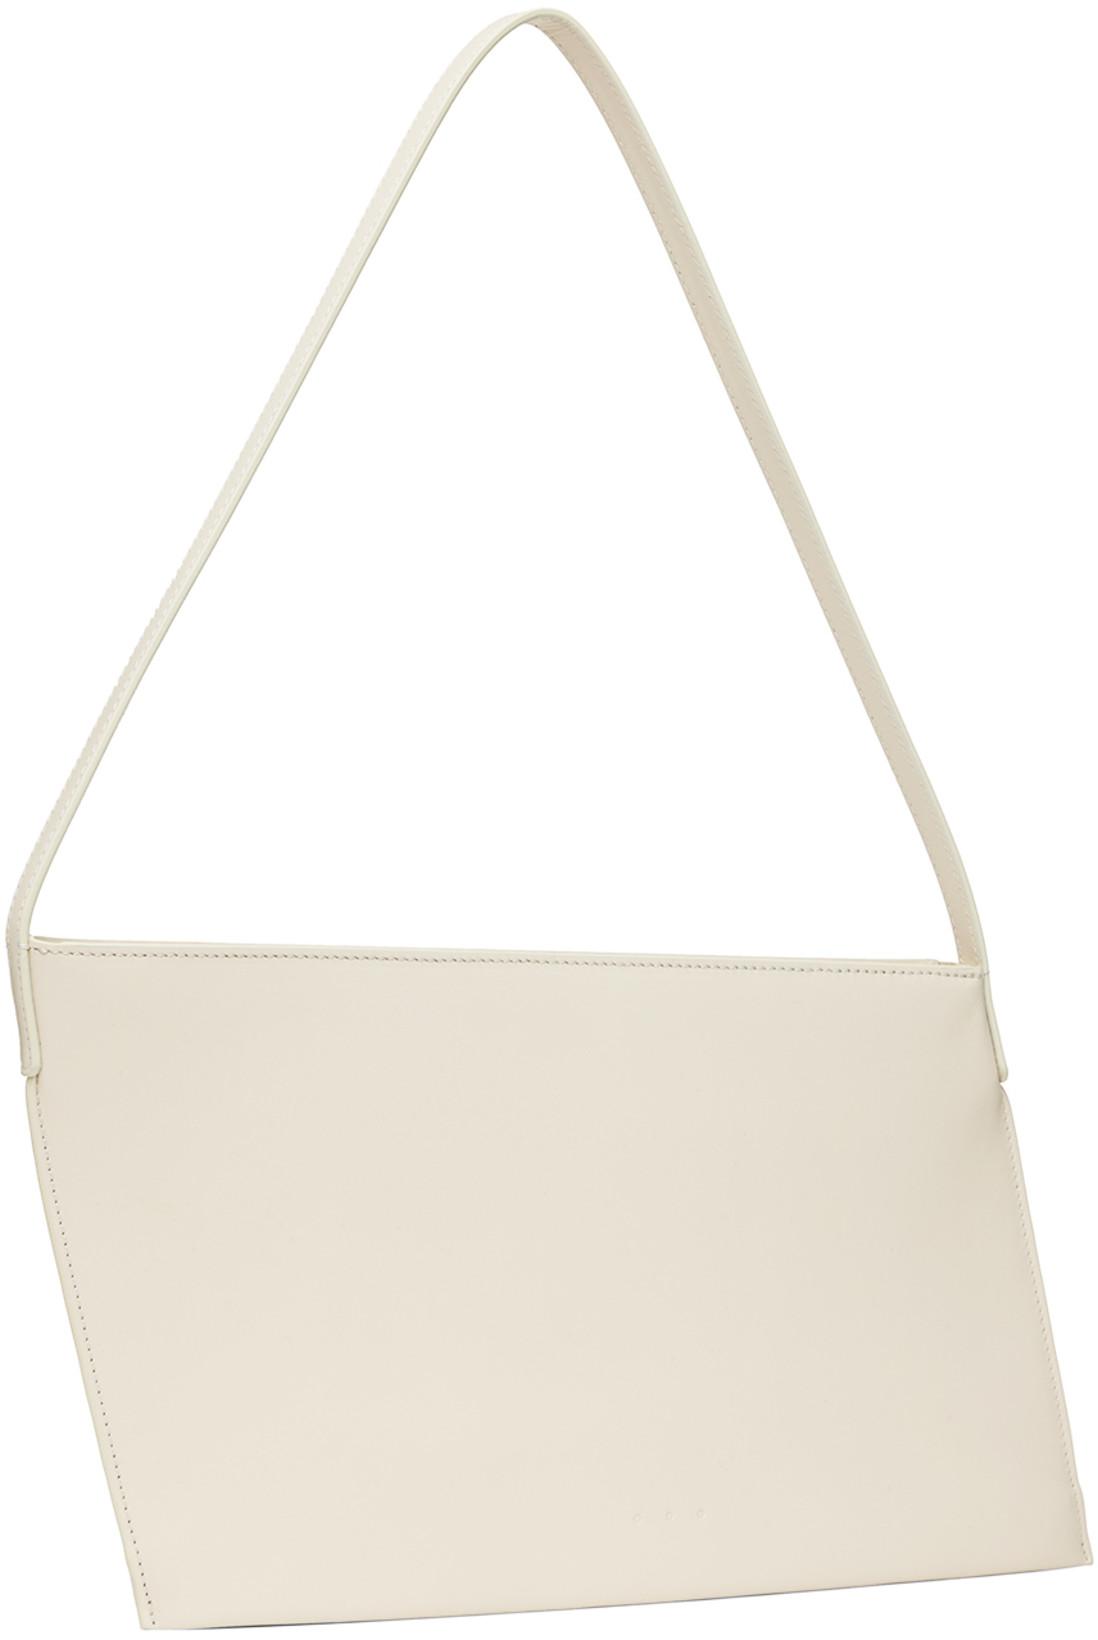 Off-White Angle Clutch Shoulder Bag by AESTHER EKME